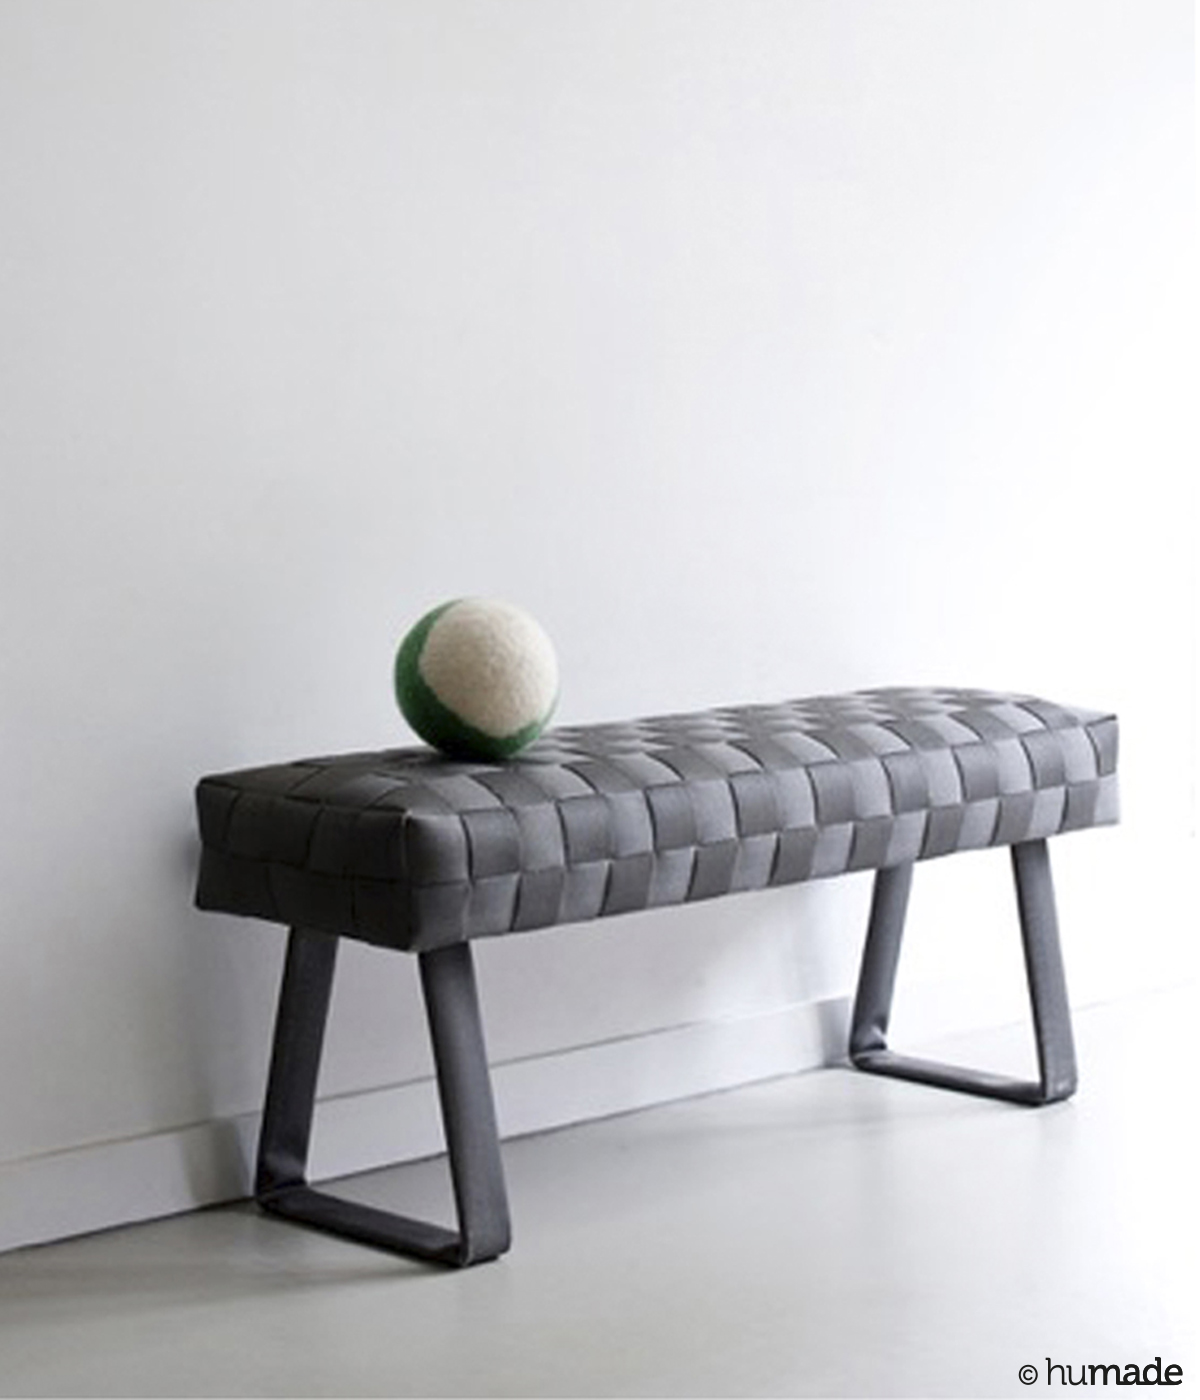 hu-made fire / Teide - The interior collection &lsquo;hu-made fire&rsquo; by Humade is made of ex-fire-hose.
This great tex...